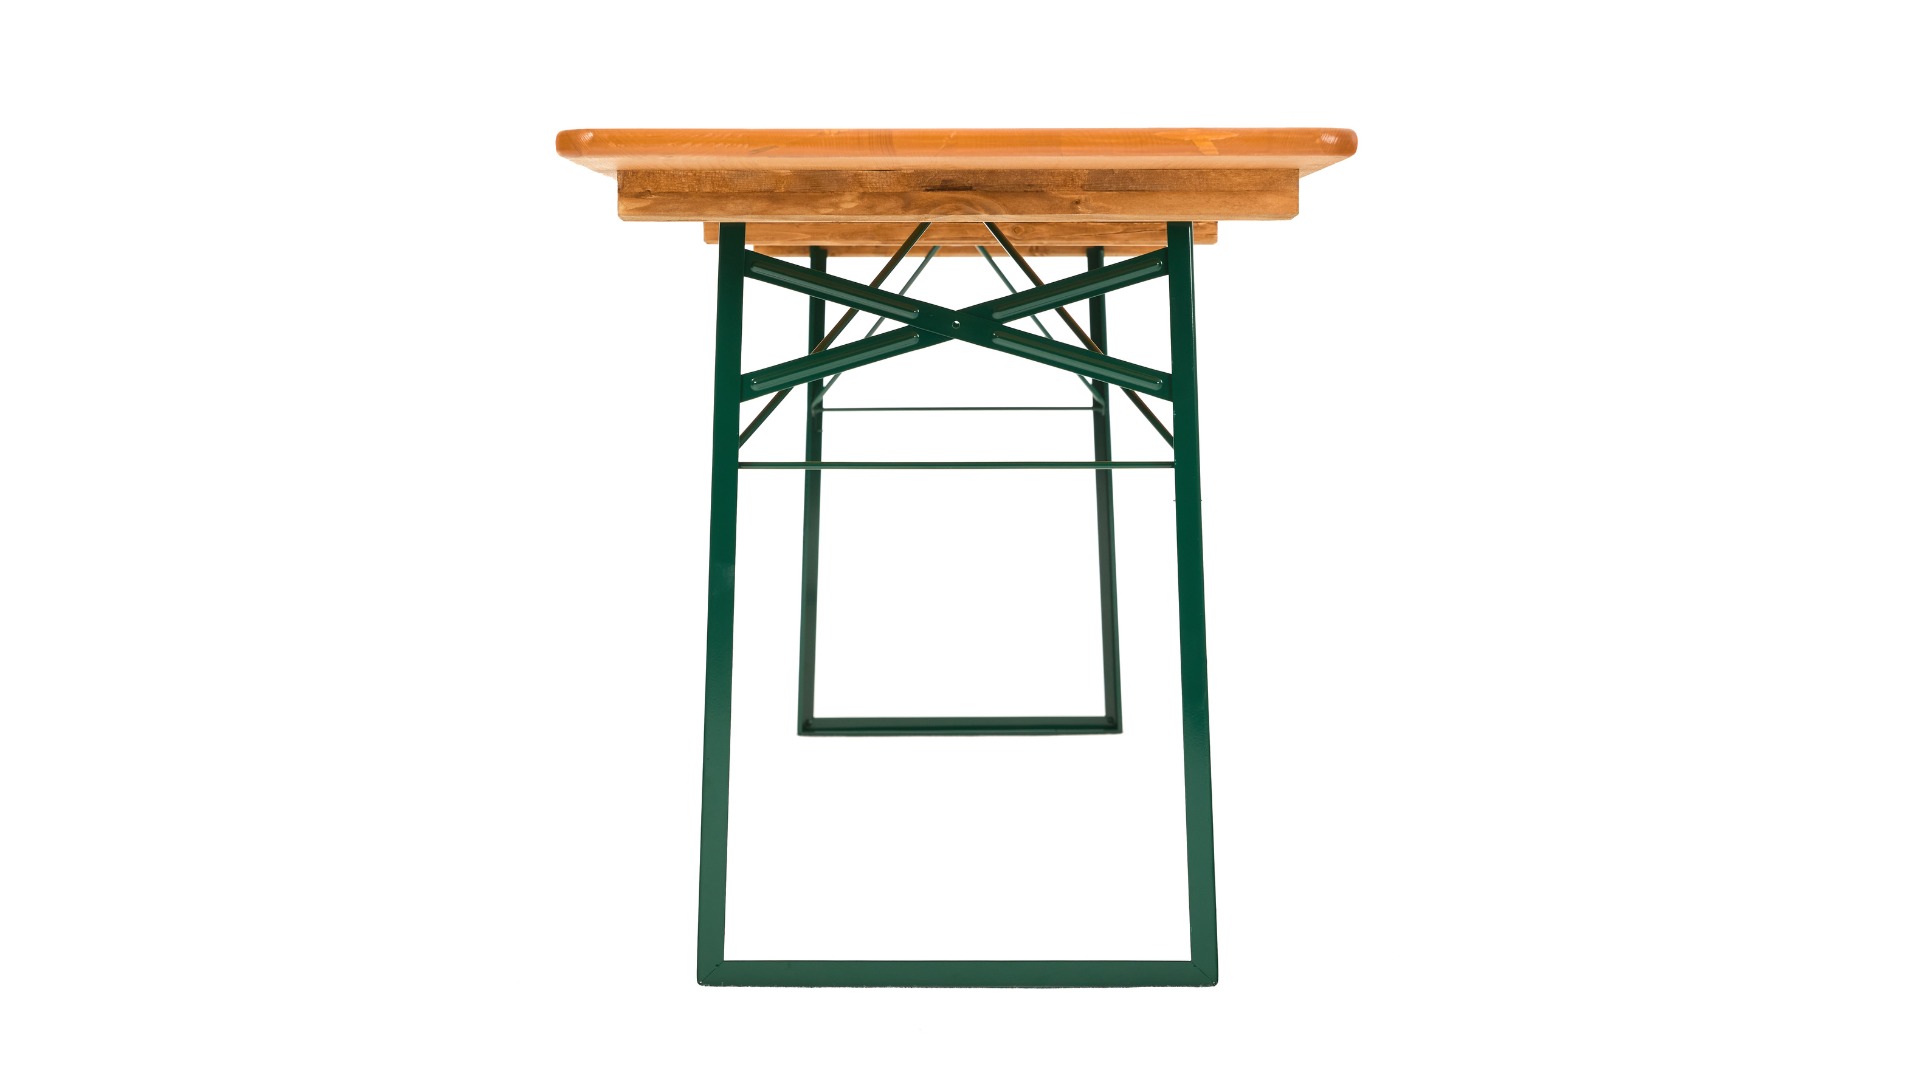 The frontal view of the classic beer bench in pine